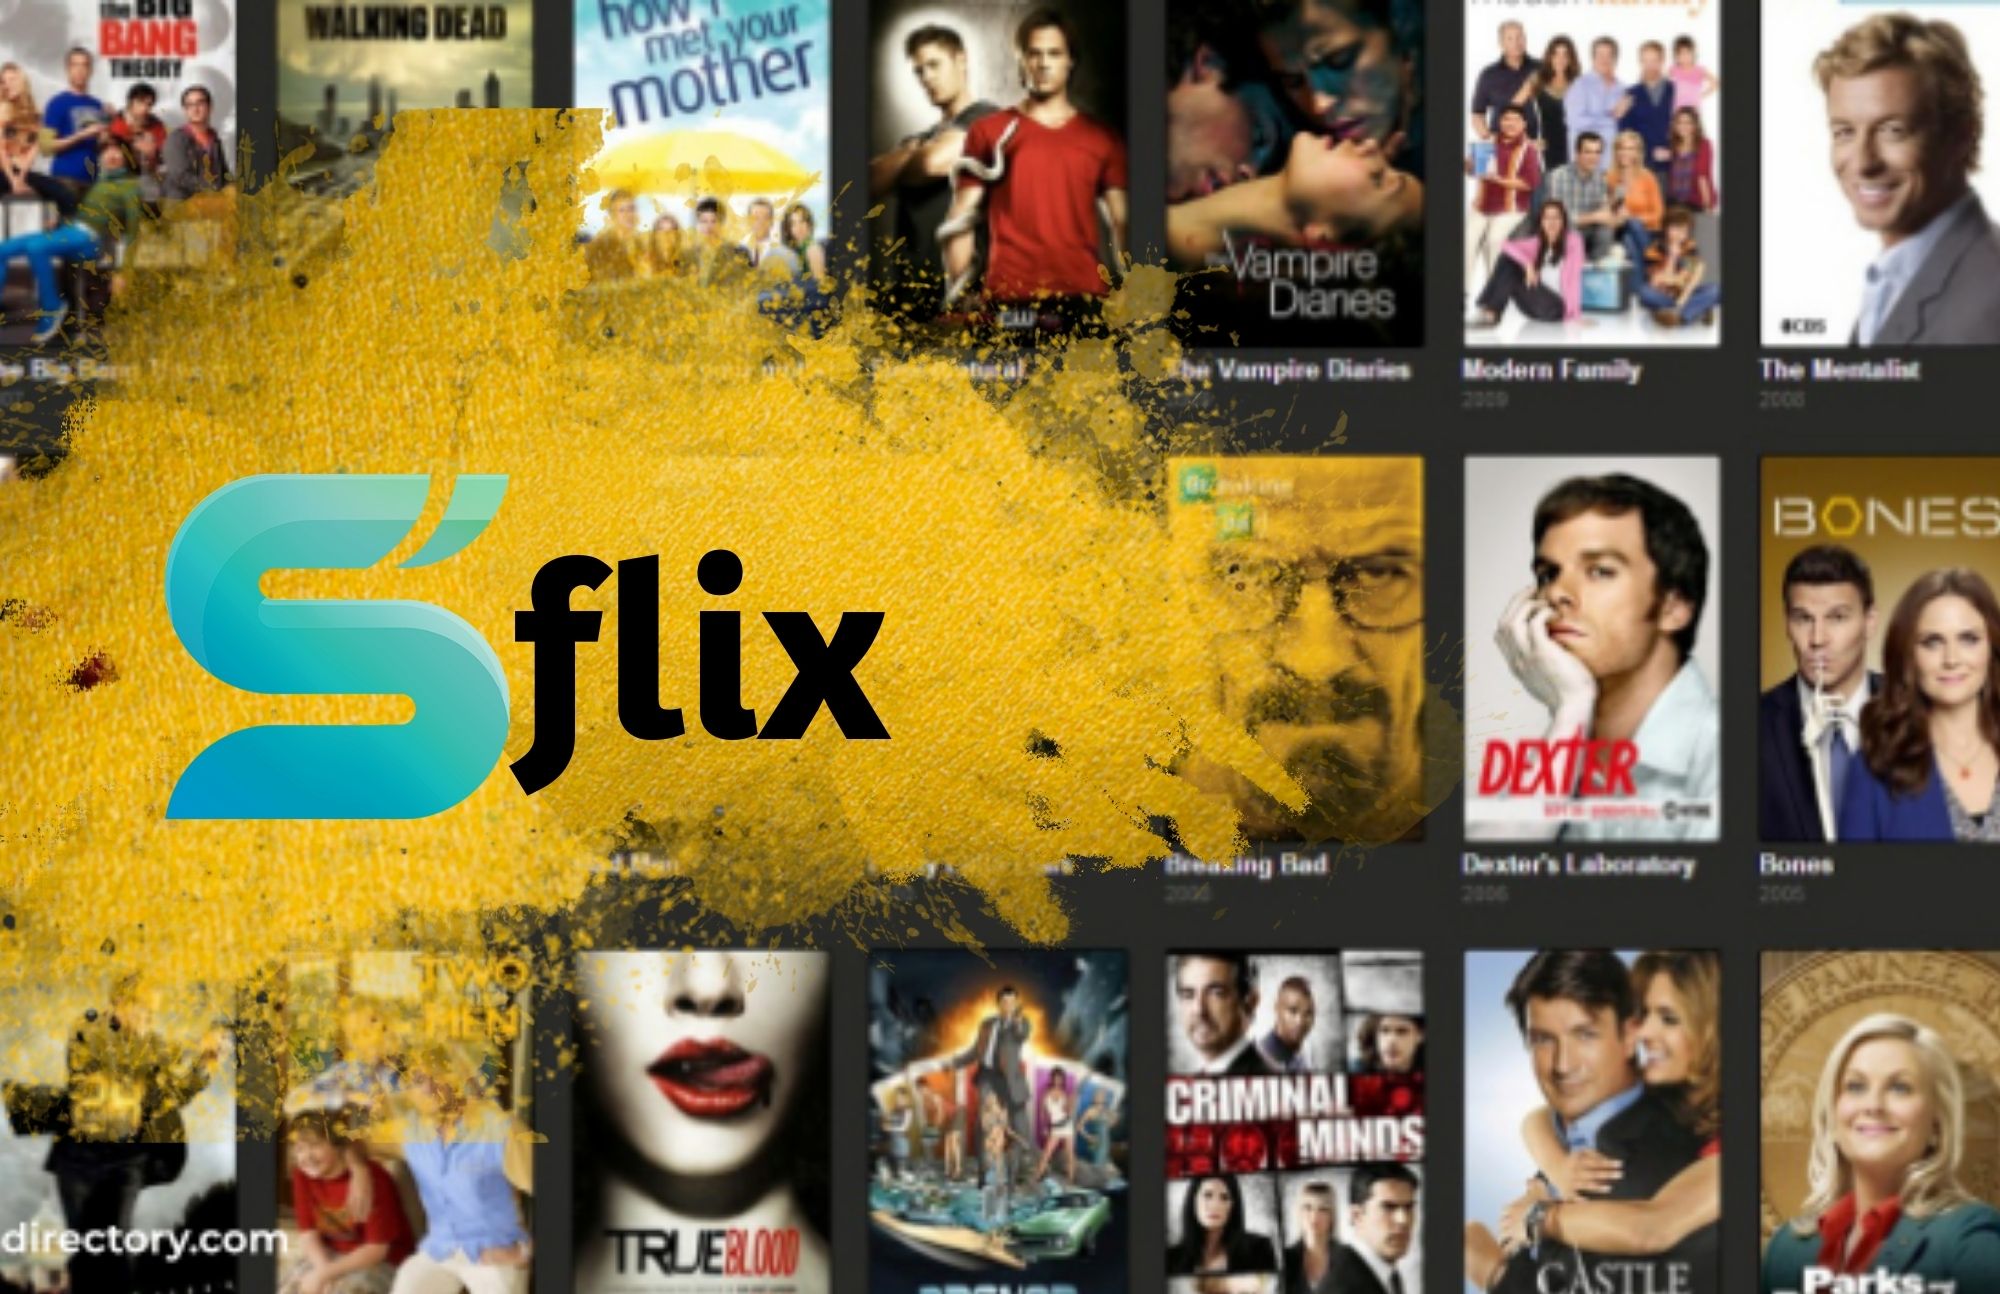 SFlix.To - Is It Safe To Watch HD Films?